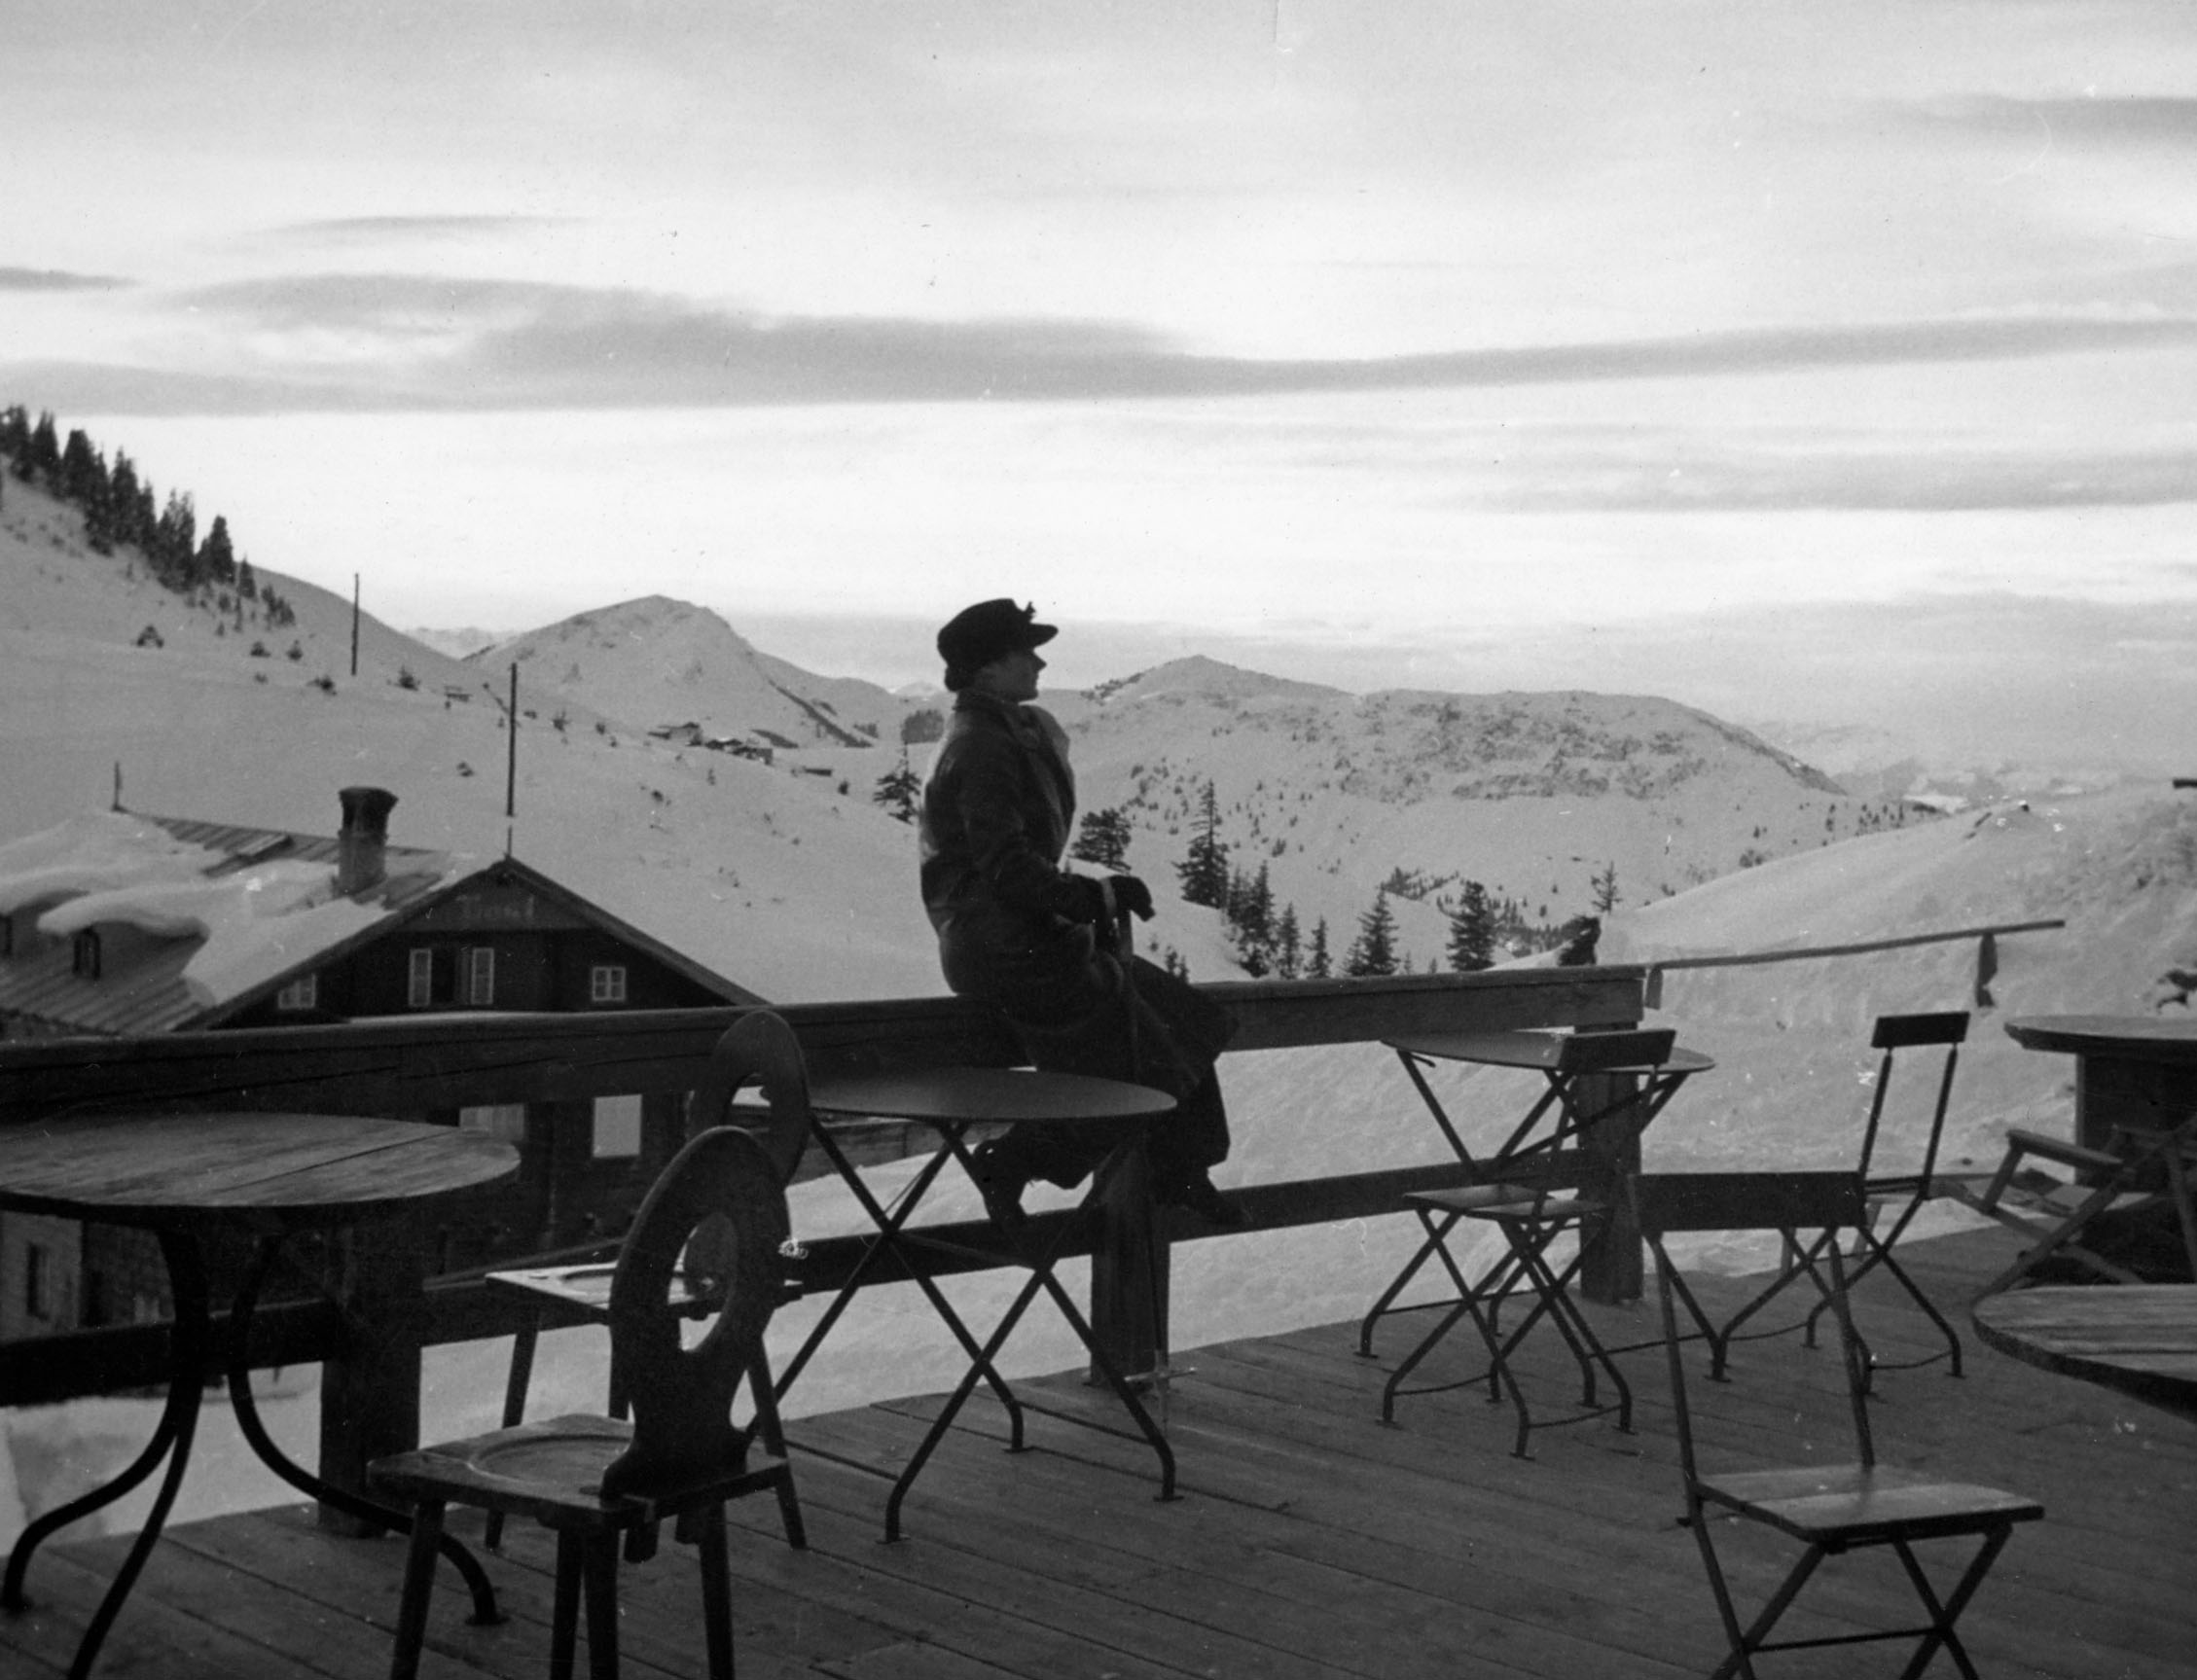 Clare gazes into the distance in Kitzbuehel, Austria, on New Year's Jan. 1939.